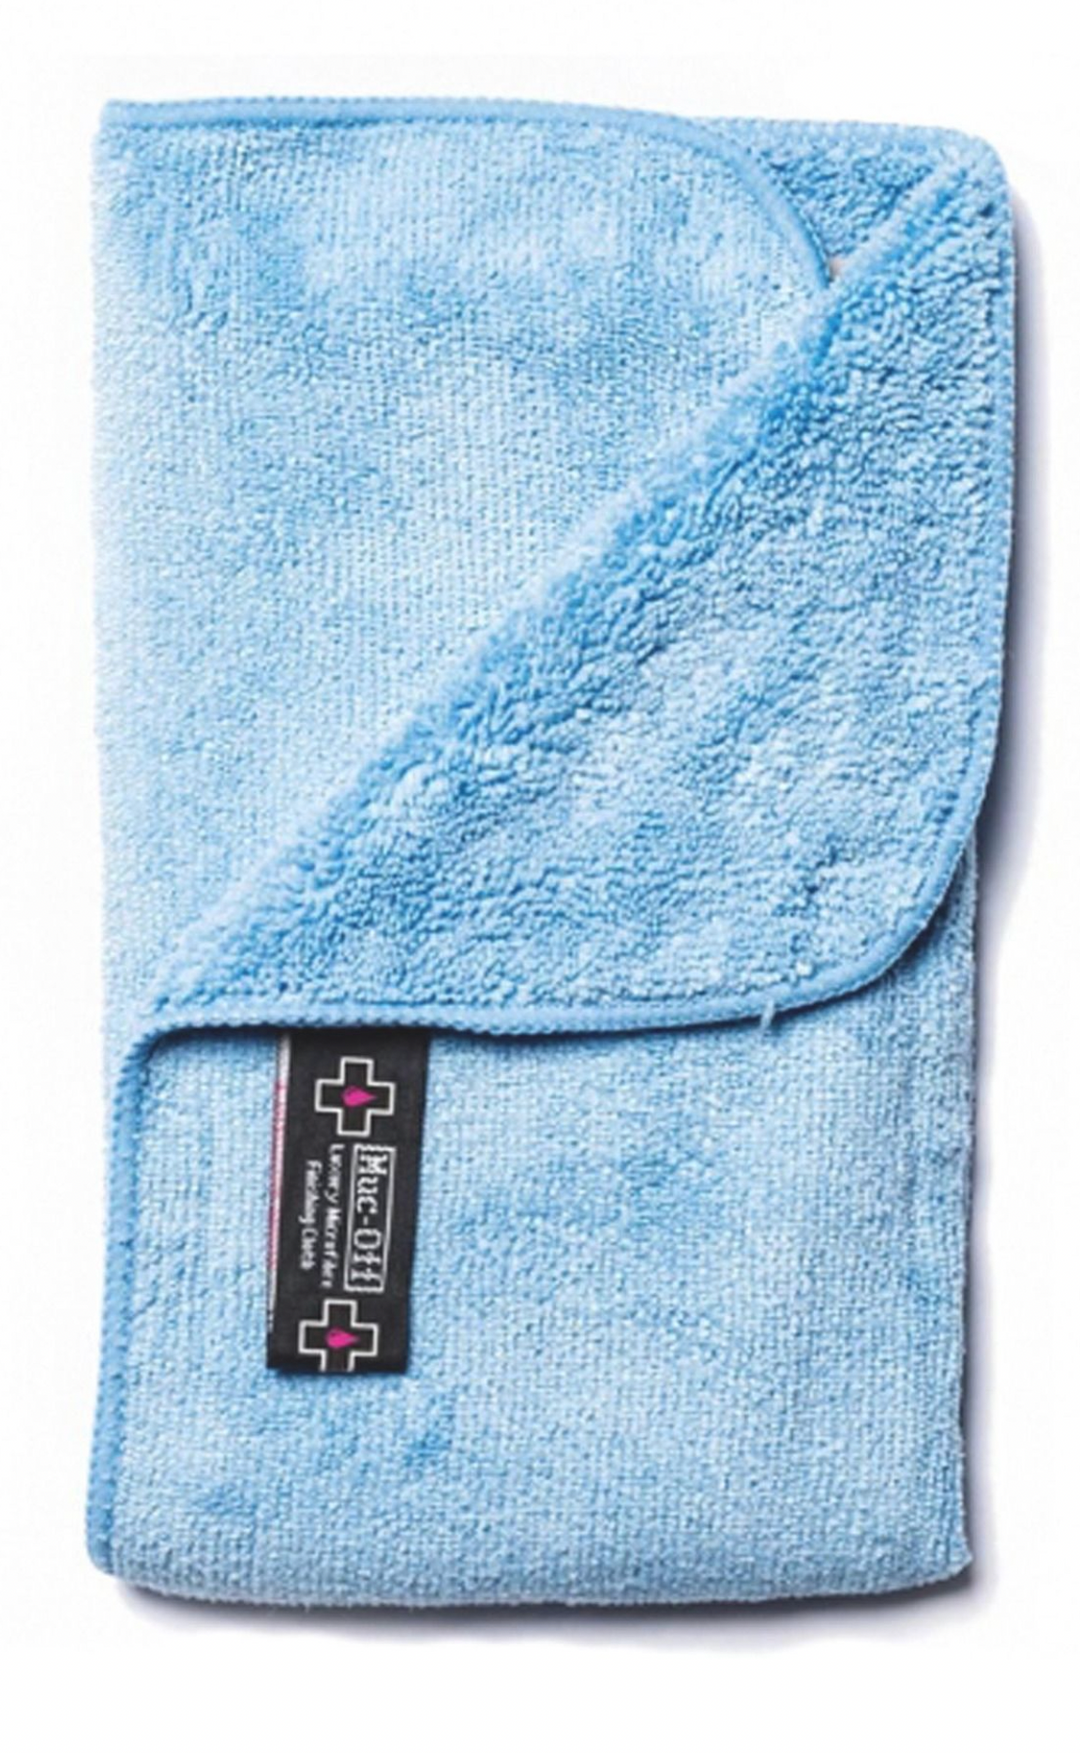 MUC-OFF CLEANING CLOTH MICROFIBRE/POLISH - Mackay Cycles - [product_SKU] - Muc-Off